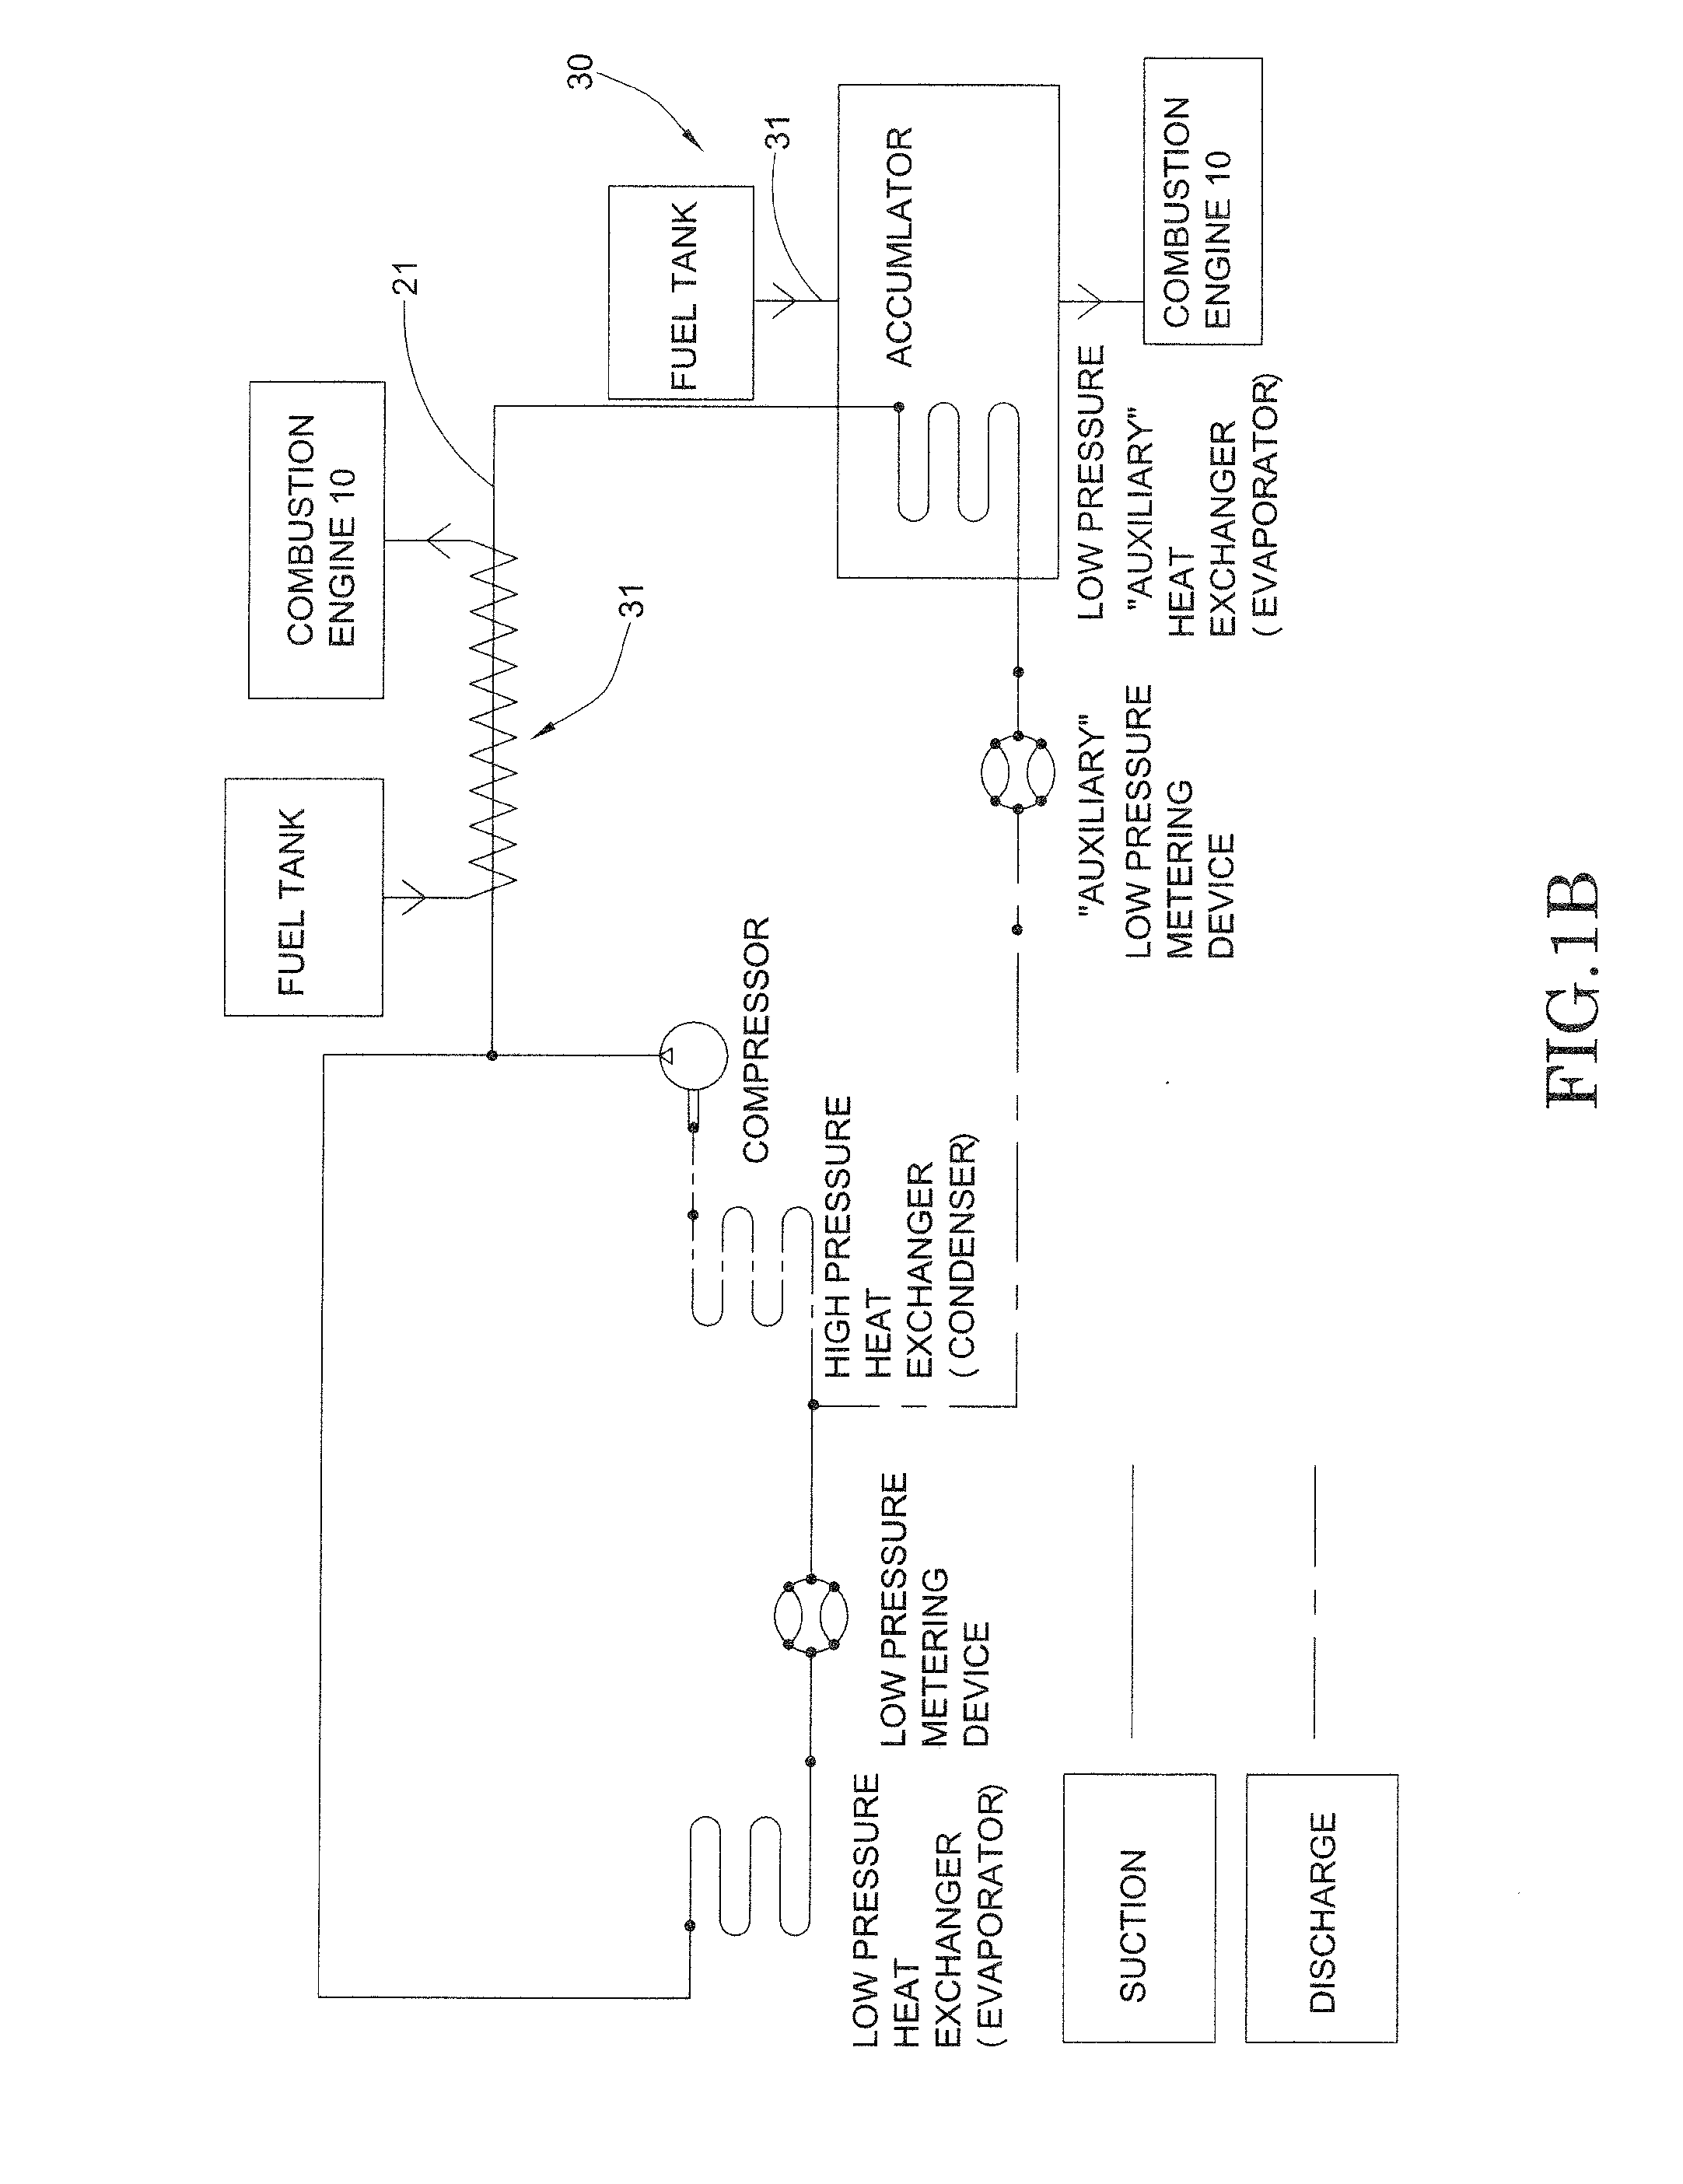 Intake Enhancement System for Vehicle